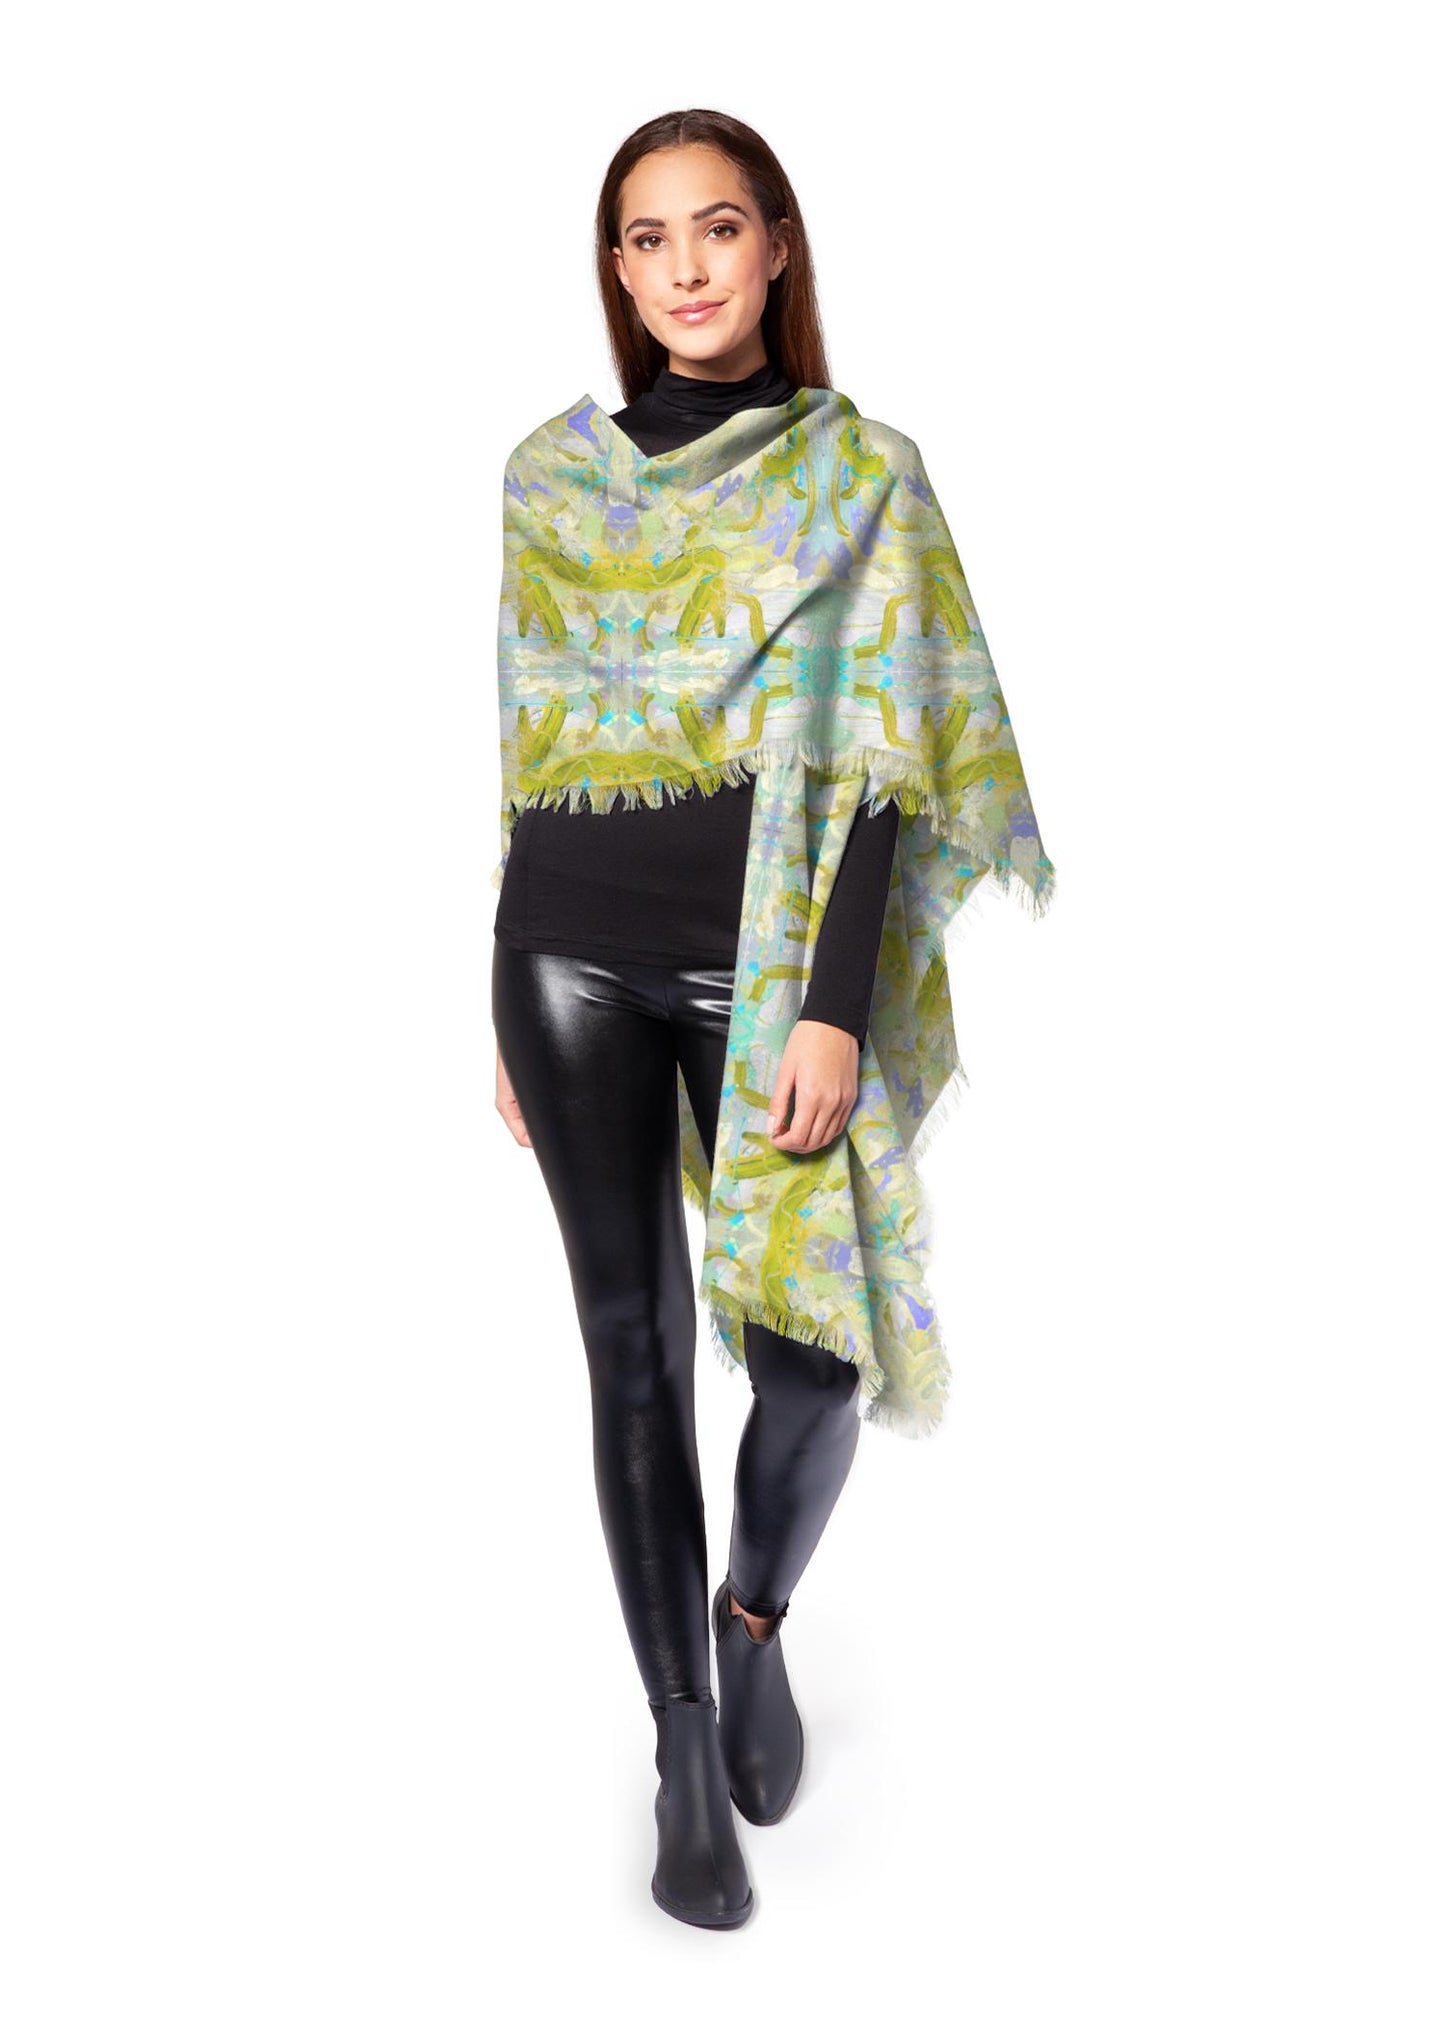 Wool Poncho Wrap - in Lime 'Free Flow'